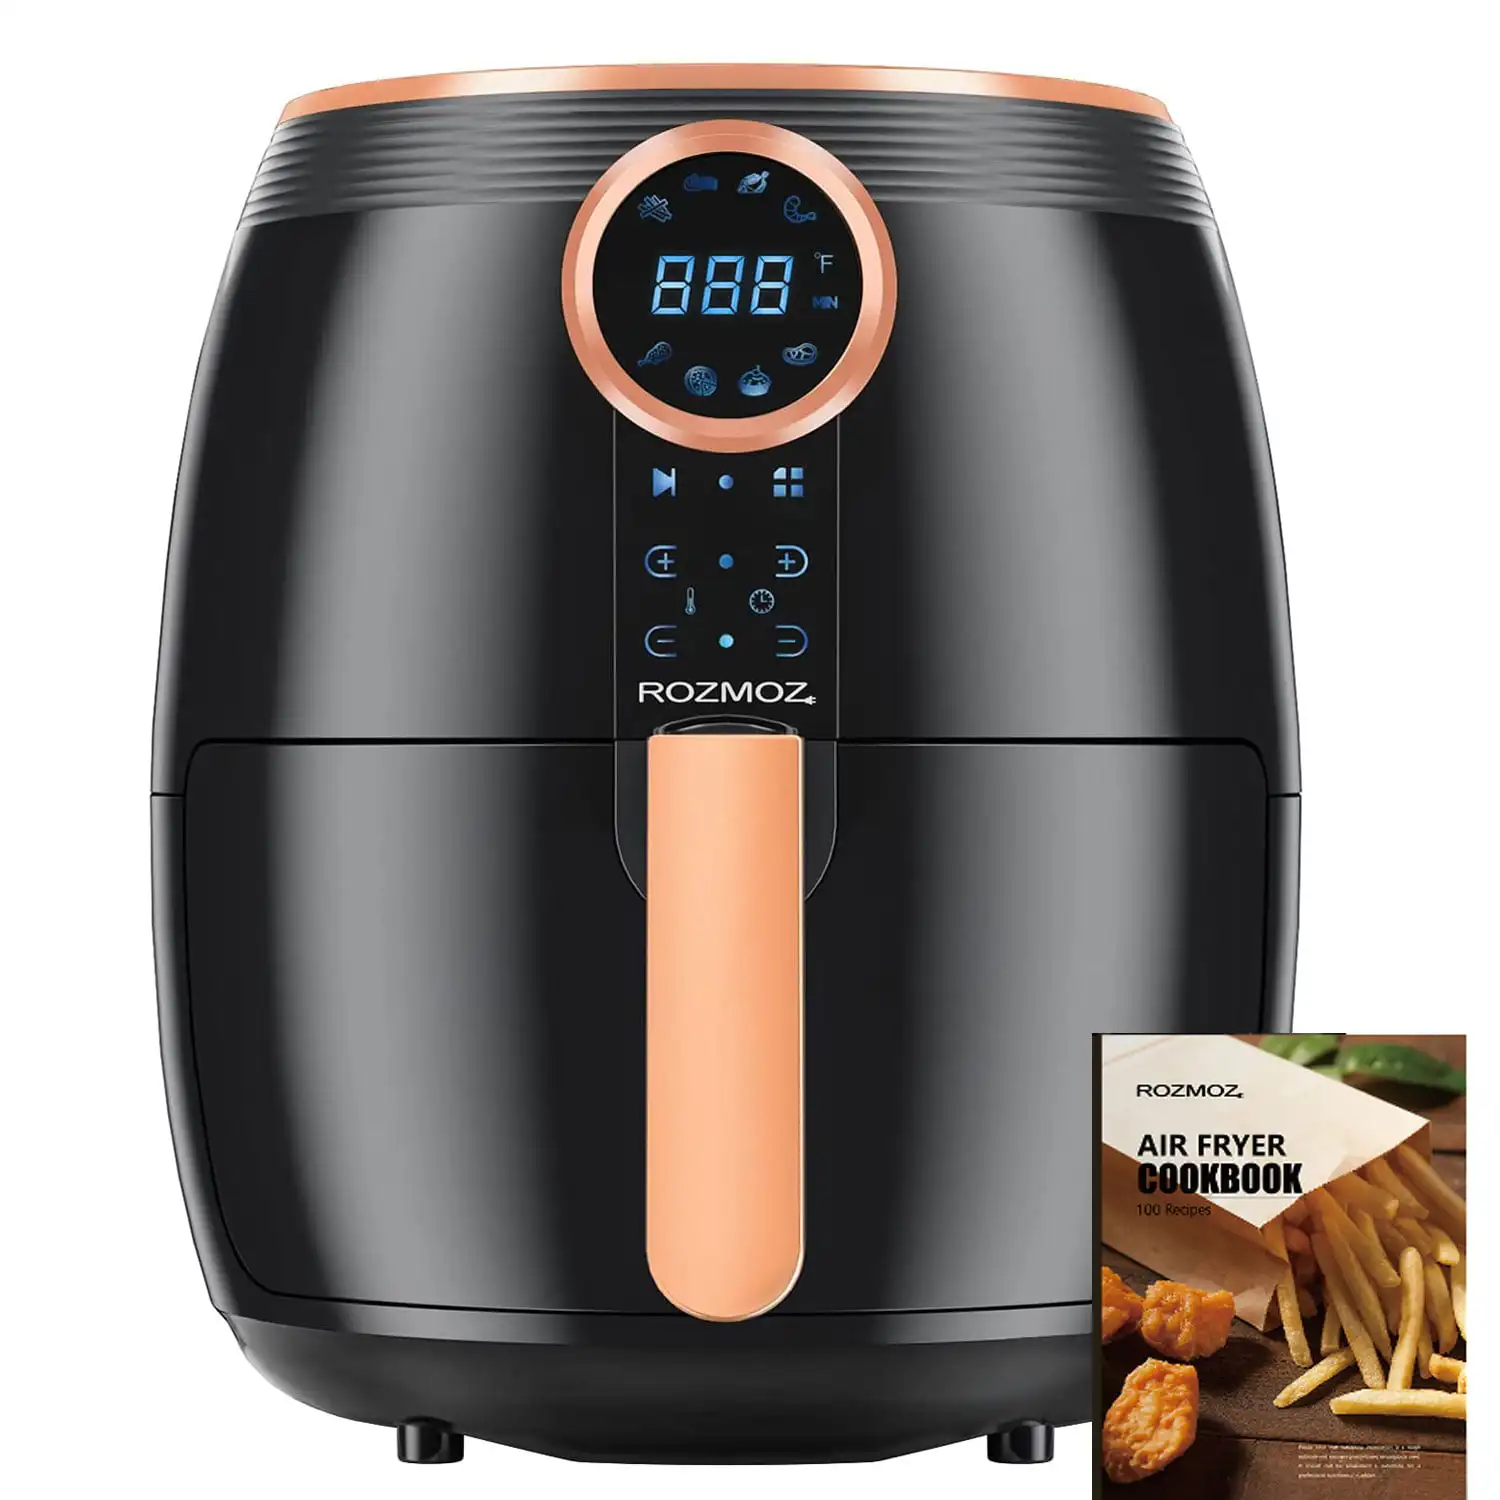 5.2 Qt Air Fryer with Touchscreen Control Oil-Less Air Fryer Cooker Auto Shutoff Black 1400W Equipped with 8 Preset Modes